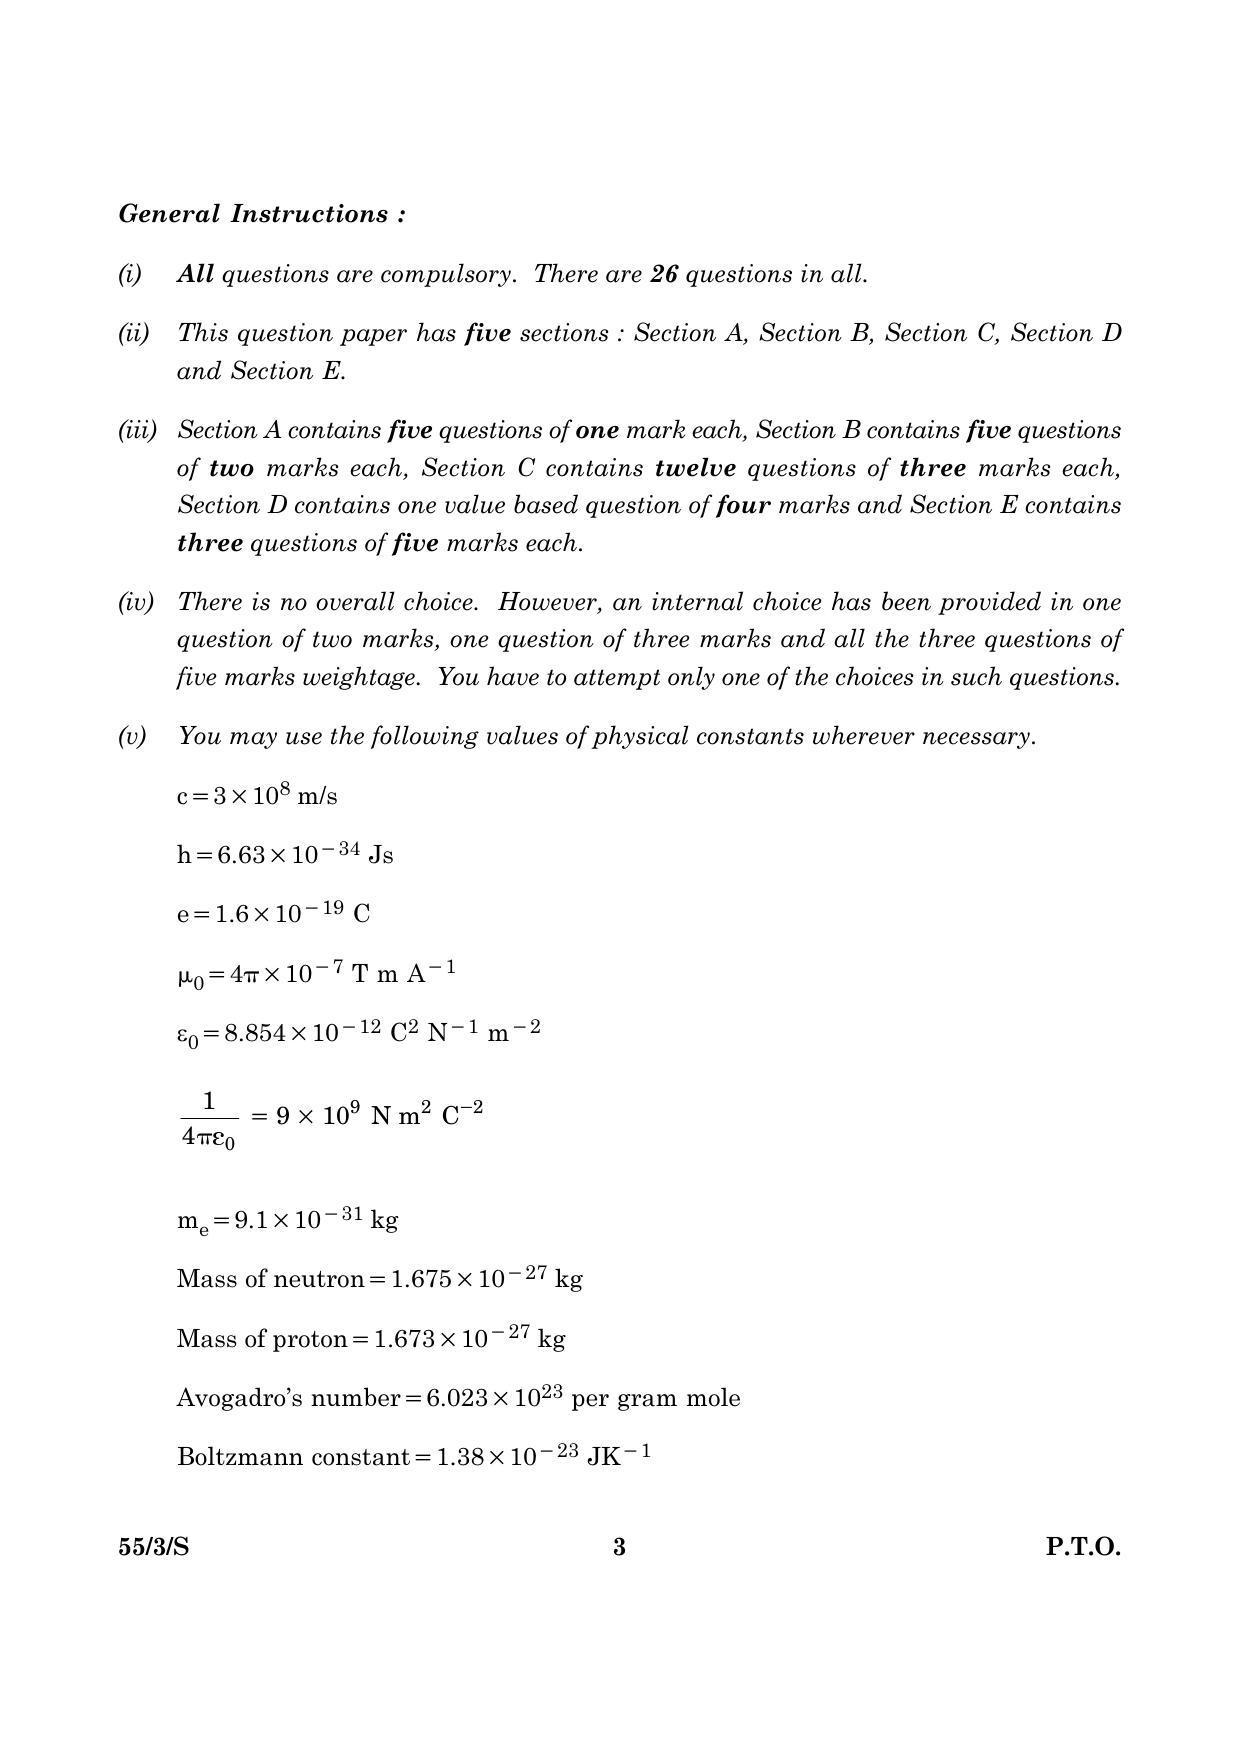 CBSE Class 12 055 Set 3 S Physics Theory 2016 Question Paper - Page 3